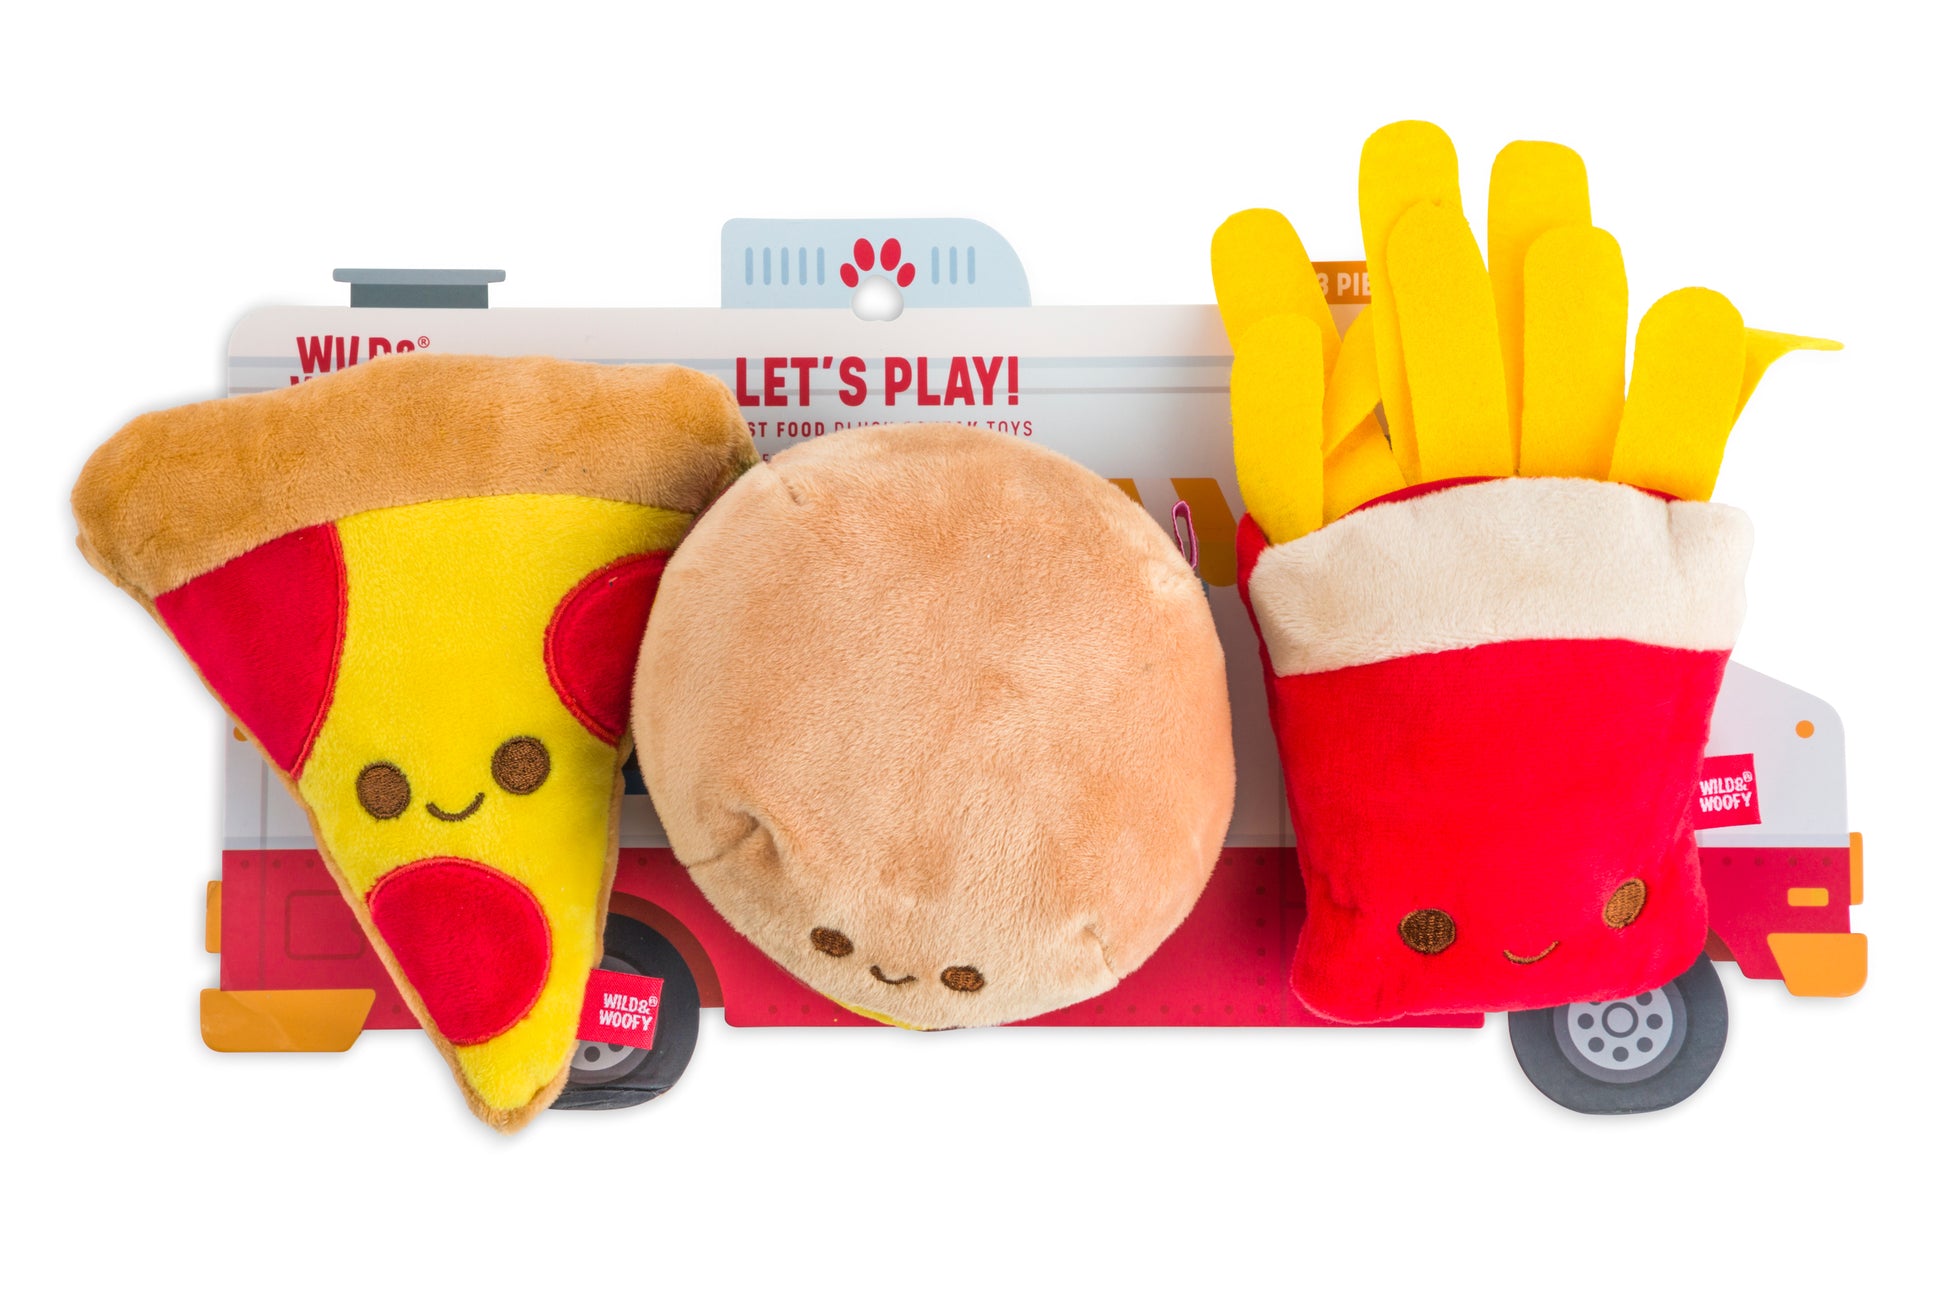 Plush dog toy shaped like a burger, pizza and french fries as a three piece set